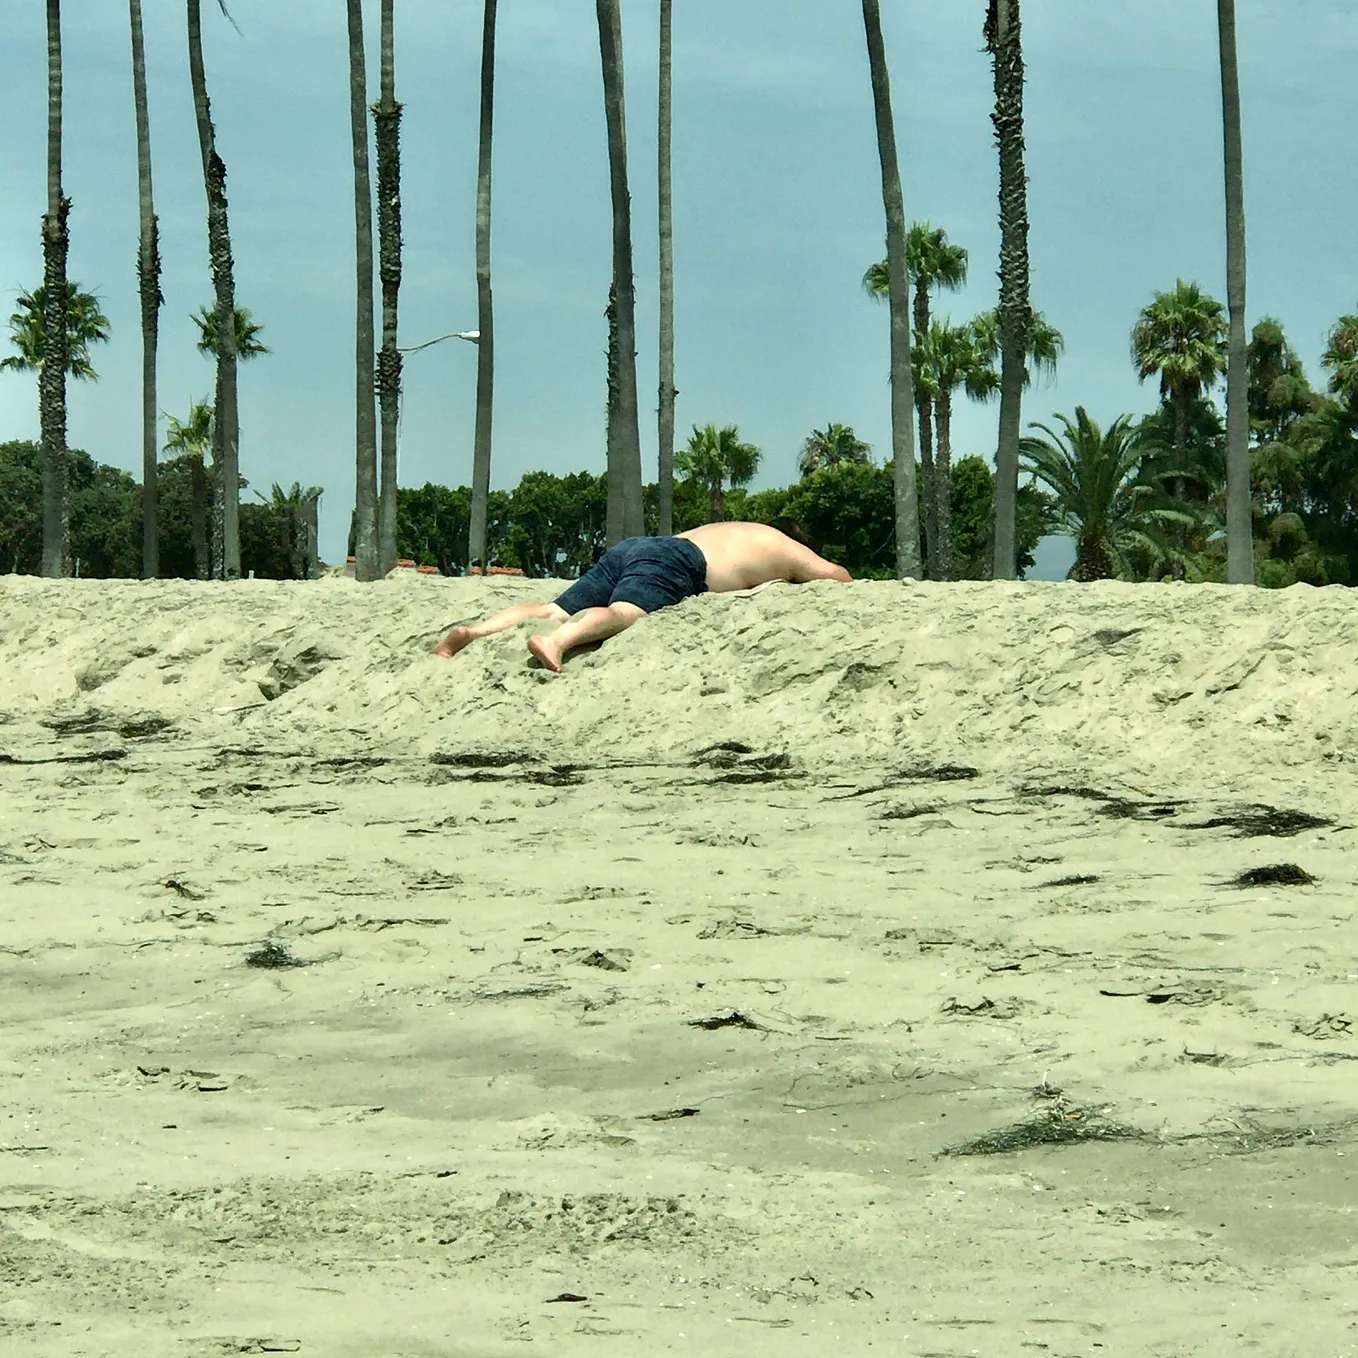 A man faced down in the sand. Photo by Mark Tulin